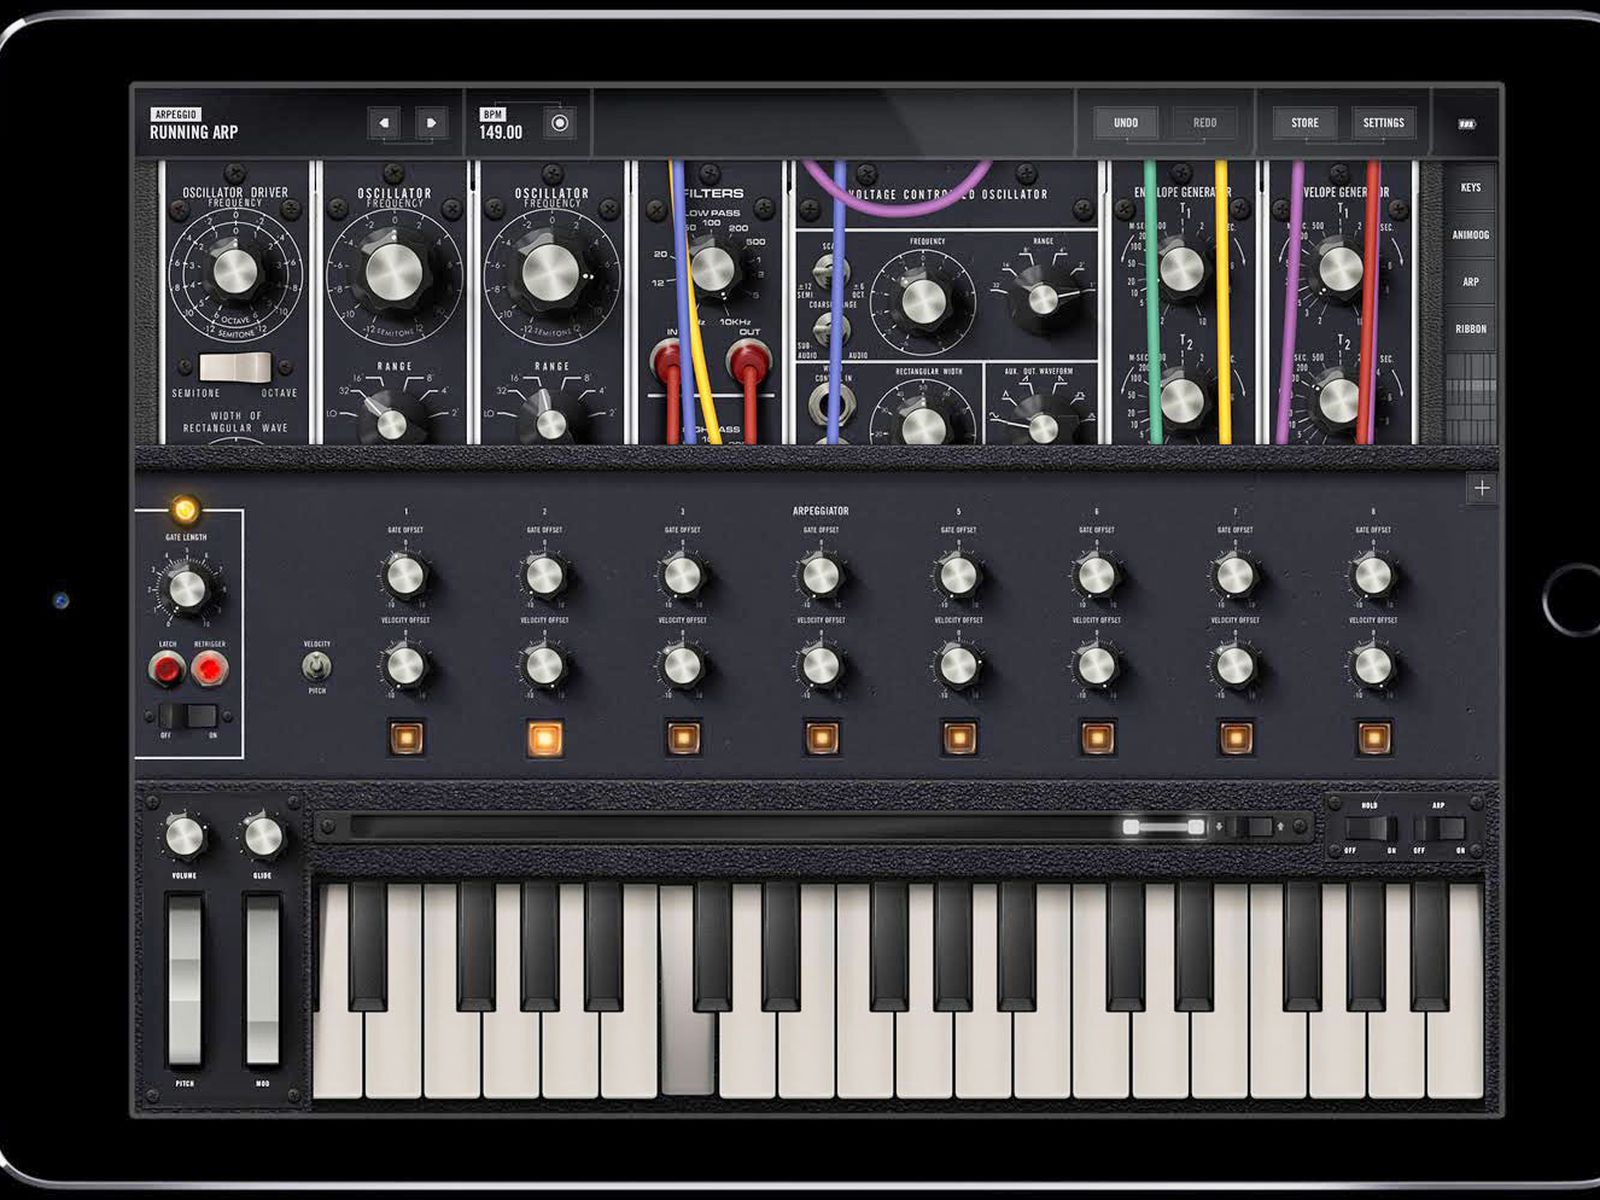 Moog application brings the classic Model 15 modular synth to the Mac